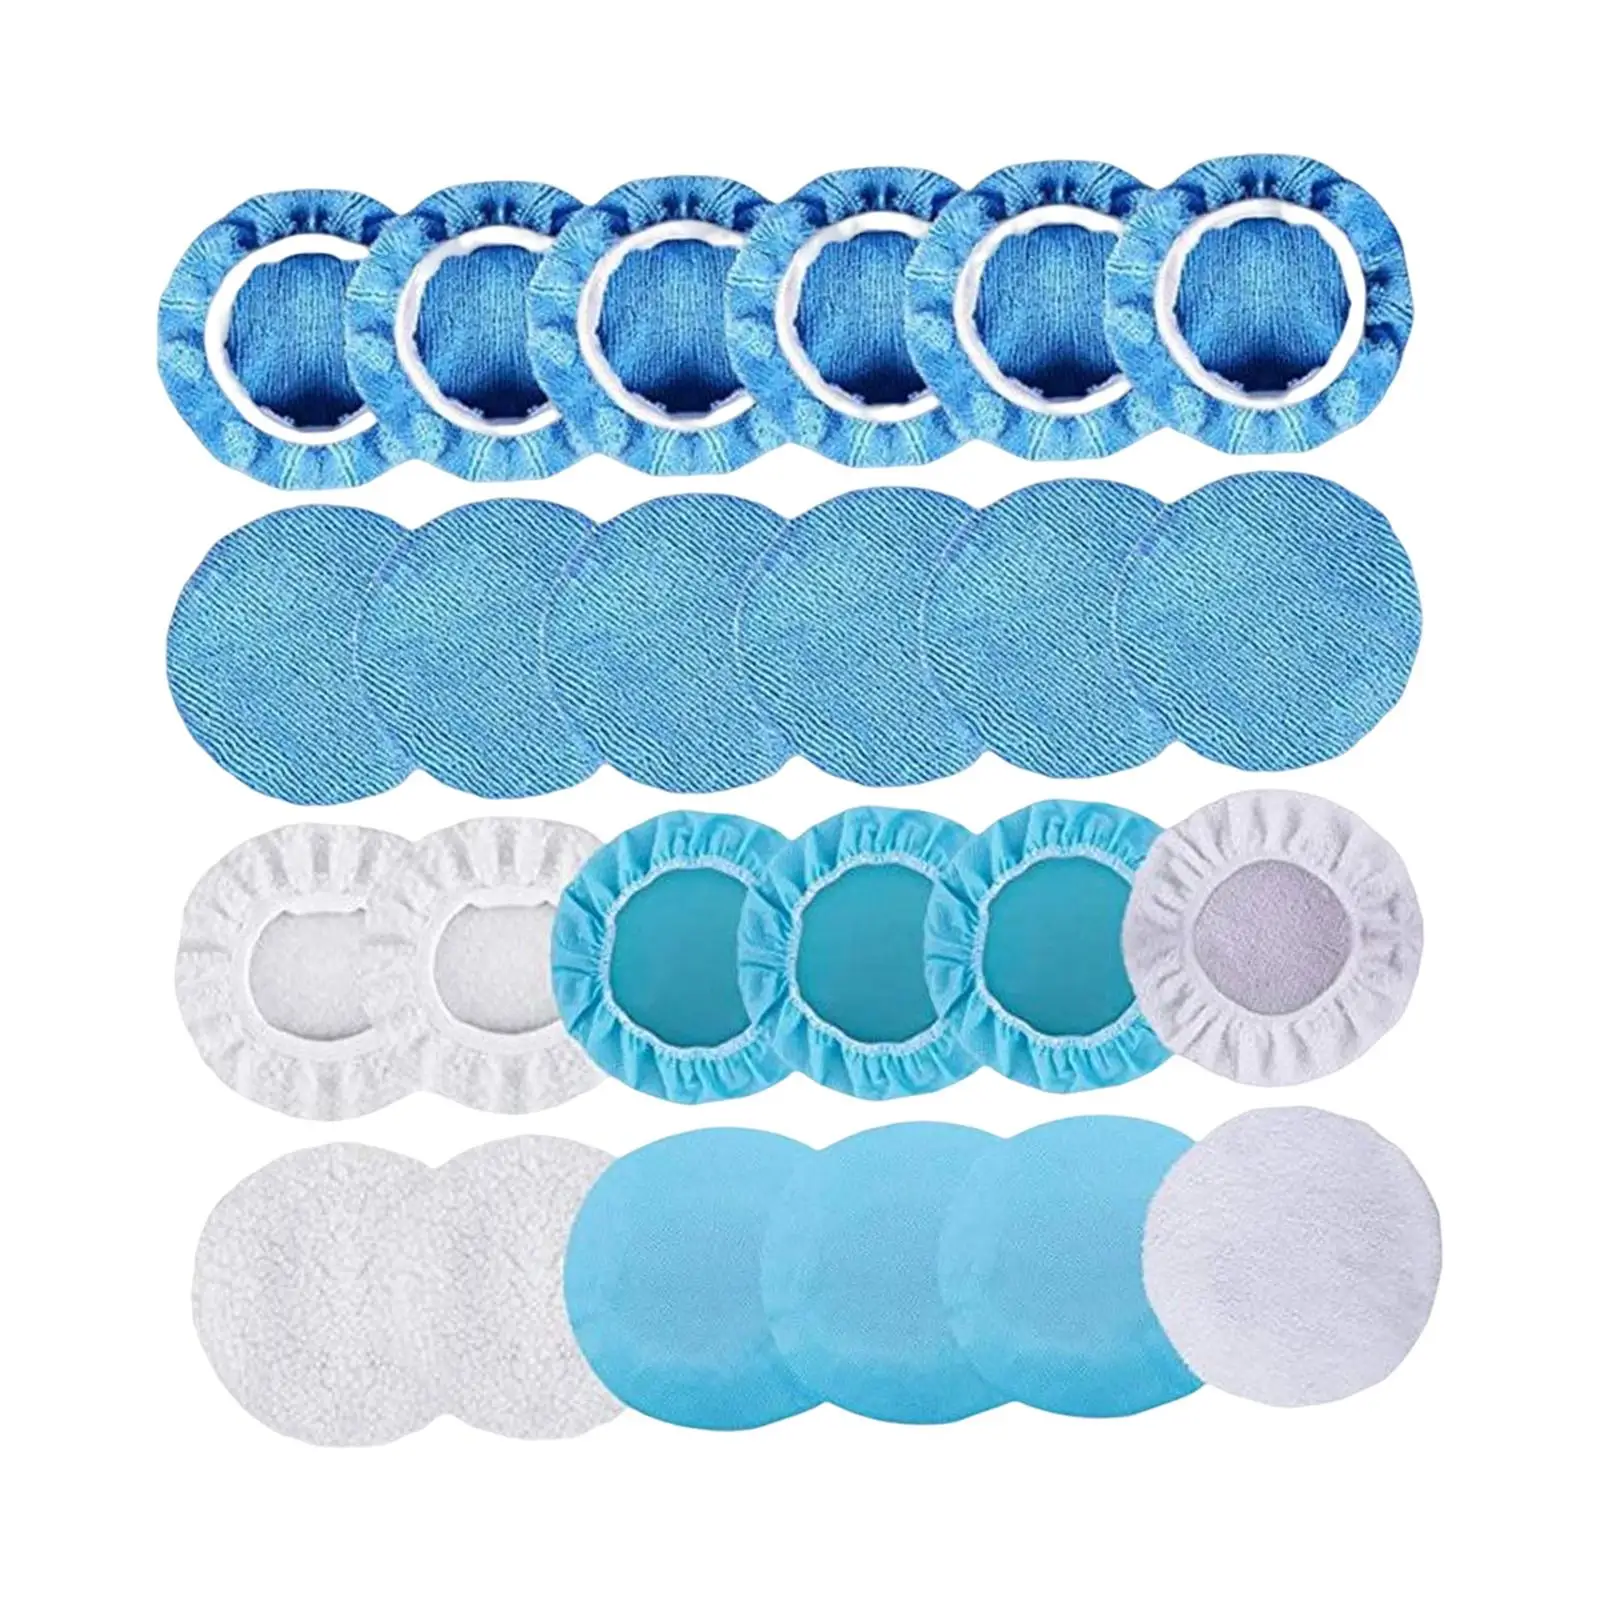 24Pcs Multipurpose Car Wax Applicator Pads Polisher Pad Cover Microfiber Detailing Buffing Pads for Interior Cleaning Polishing